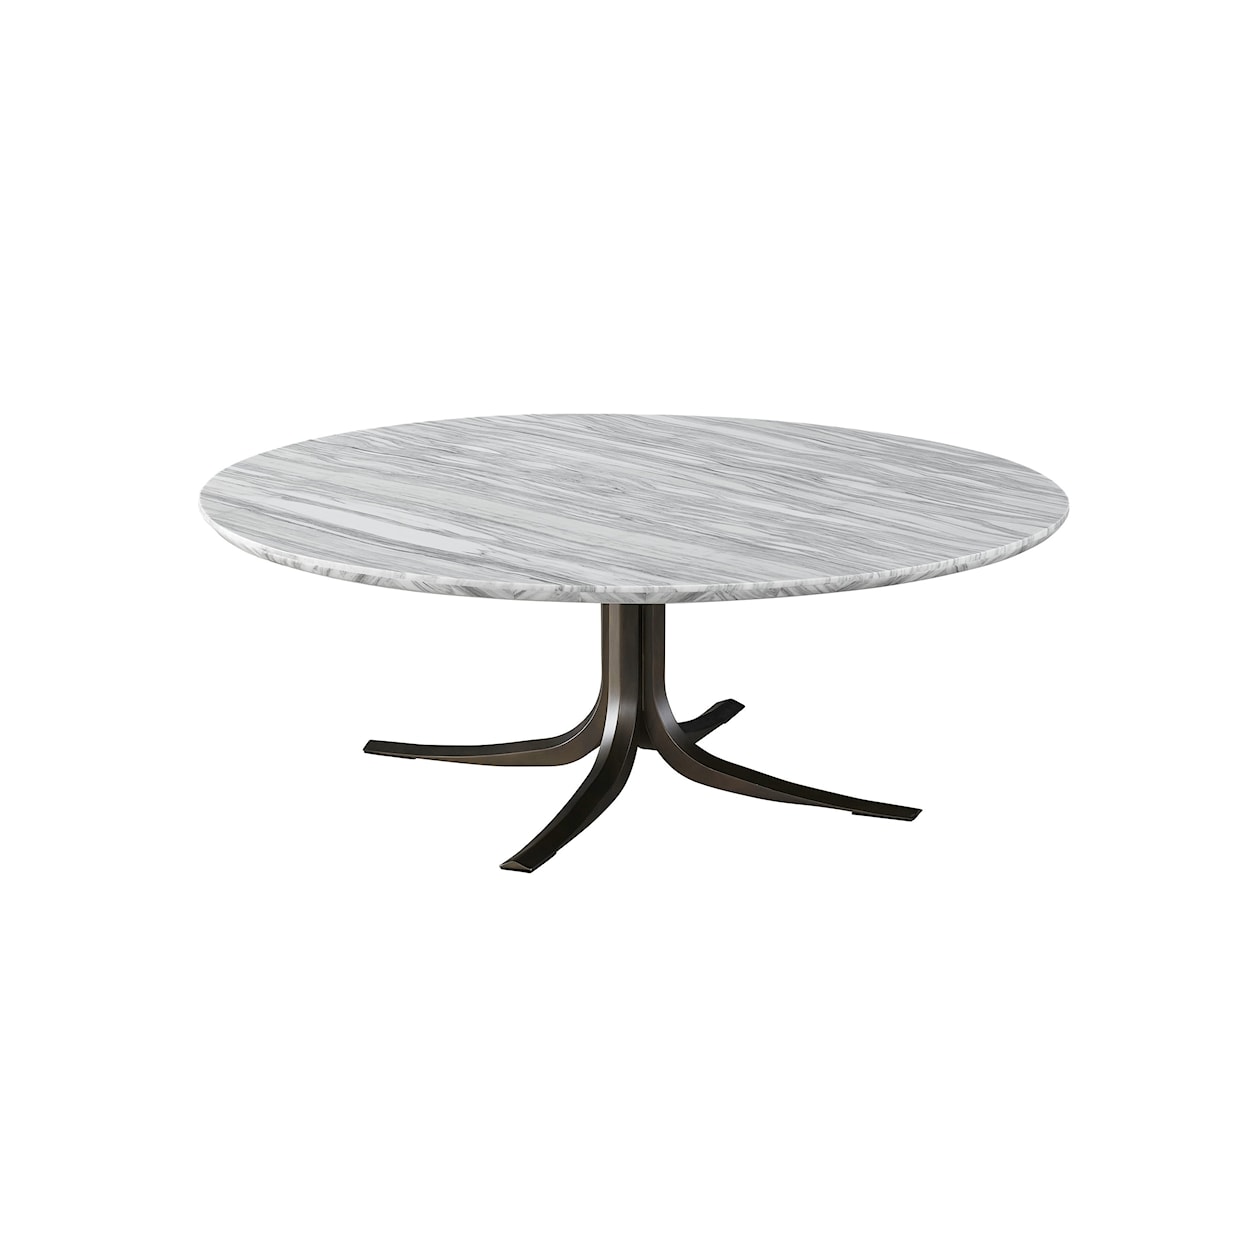 Universal ErinnV x Universal Marble Top Cocktail Table